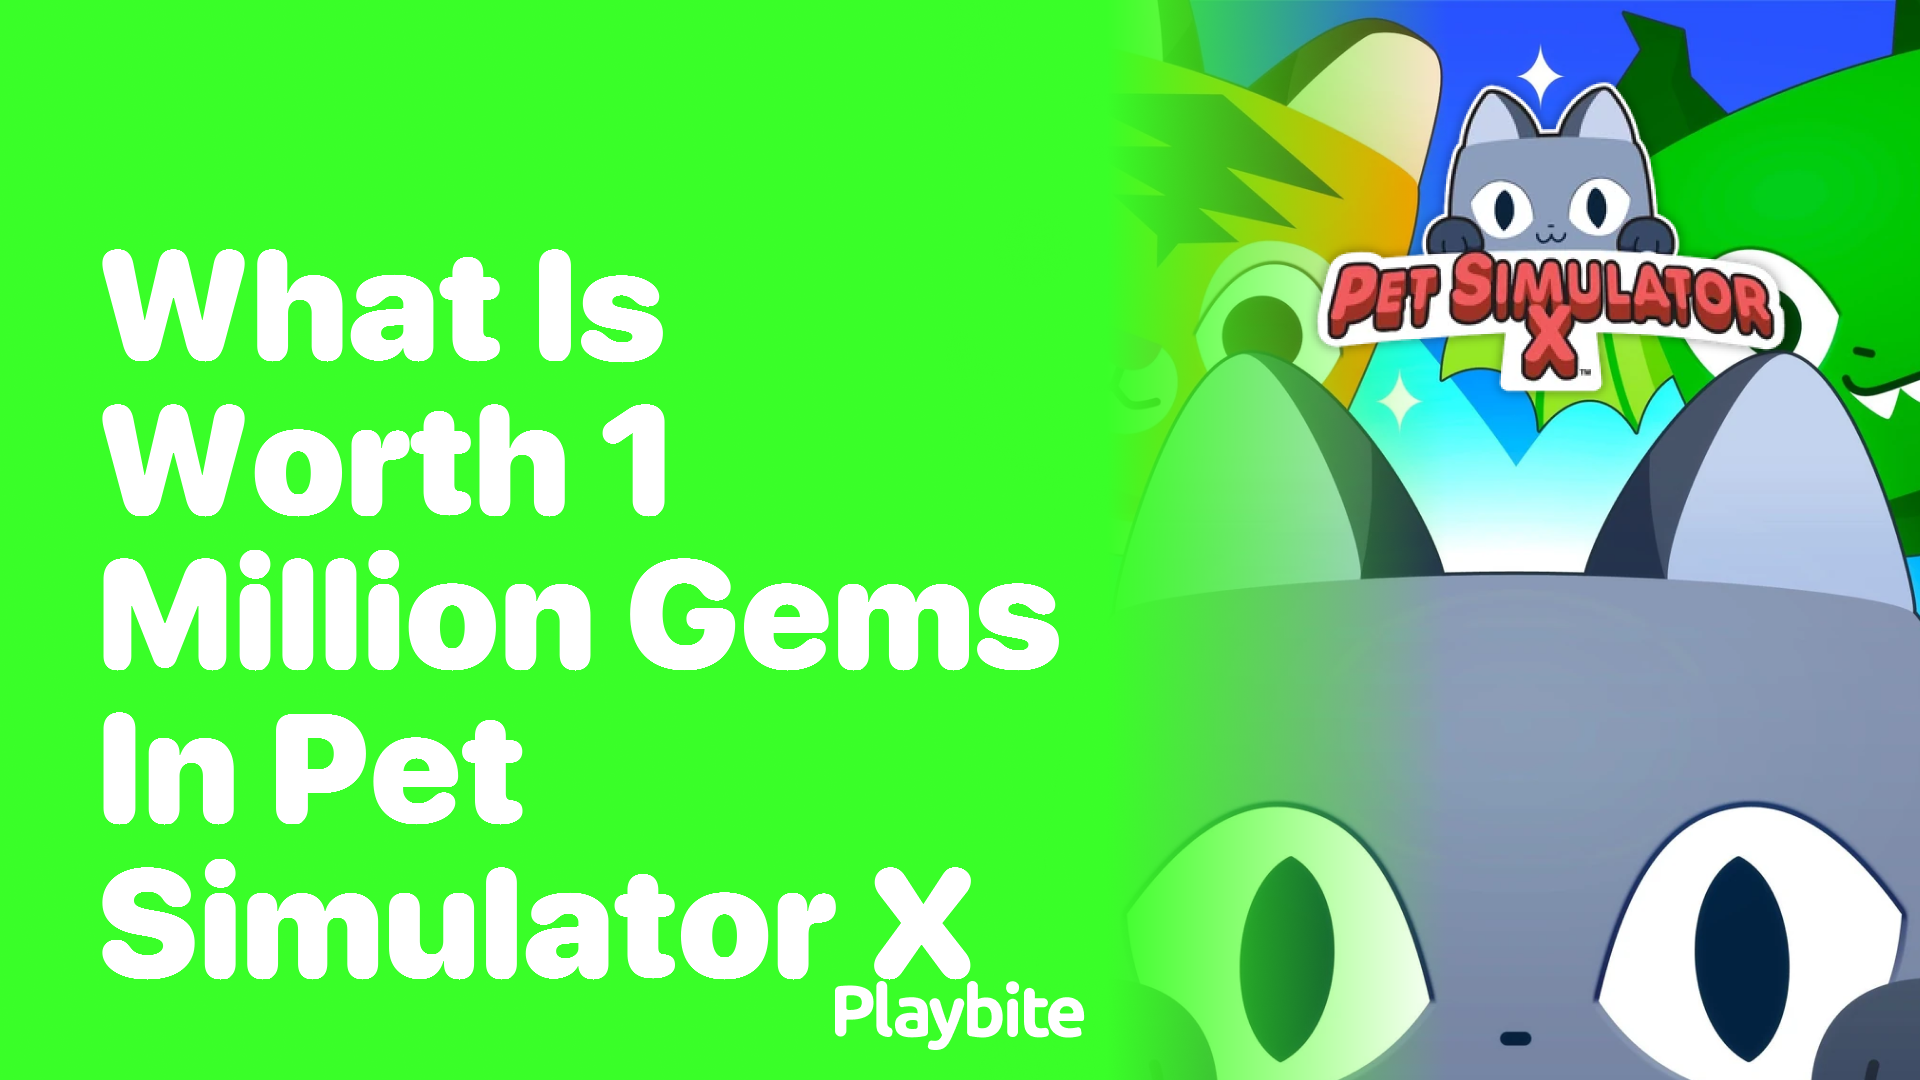 What Can You Get with 1 Million Gems in Pet Simulator X?